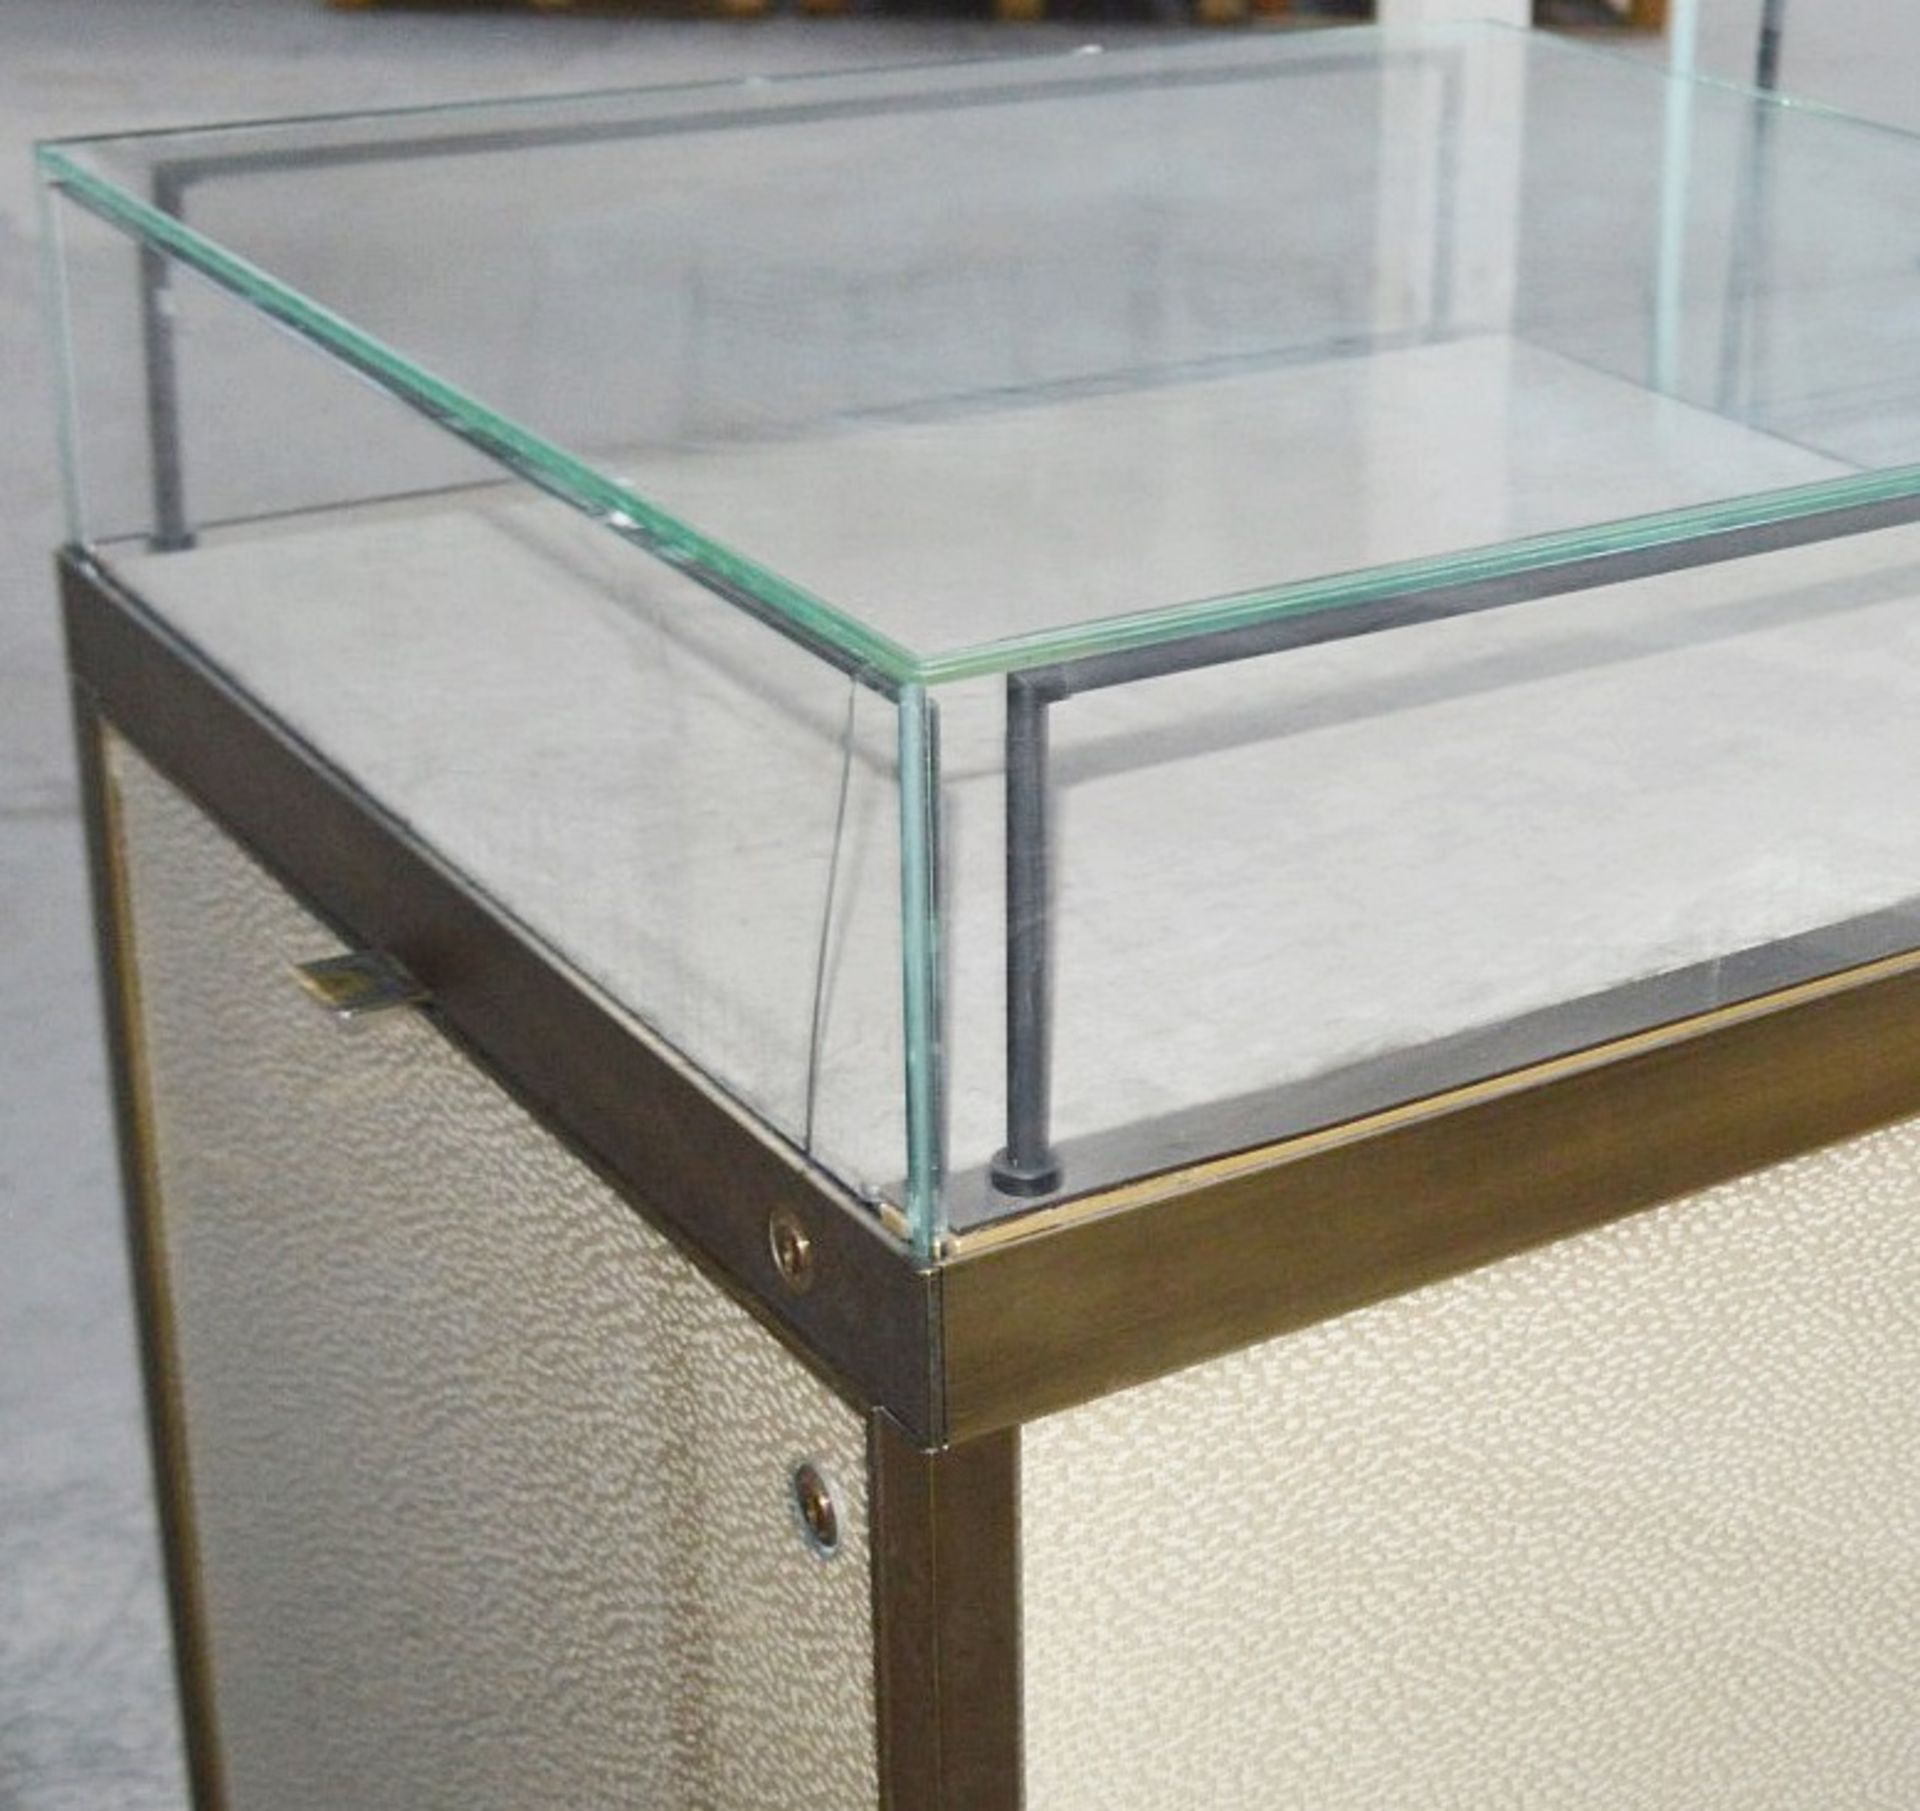 1 x Luxury Double Cabinet Glass Display Case - Dimensions: H124 x W100 x D65cm - Ex-Showroom Piece - Image 2 of 9